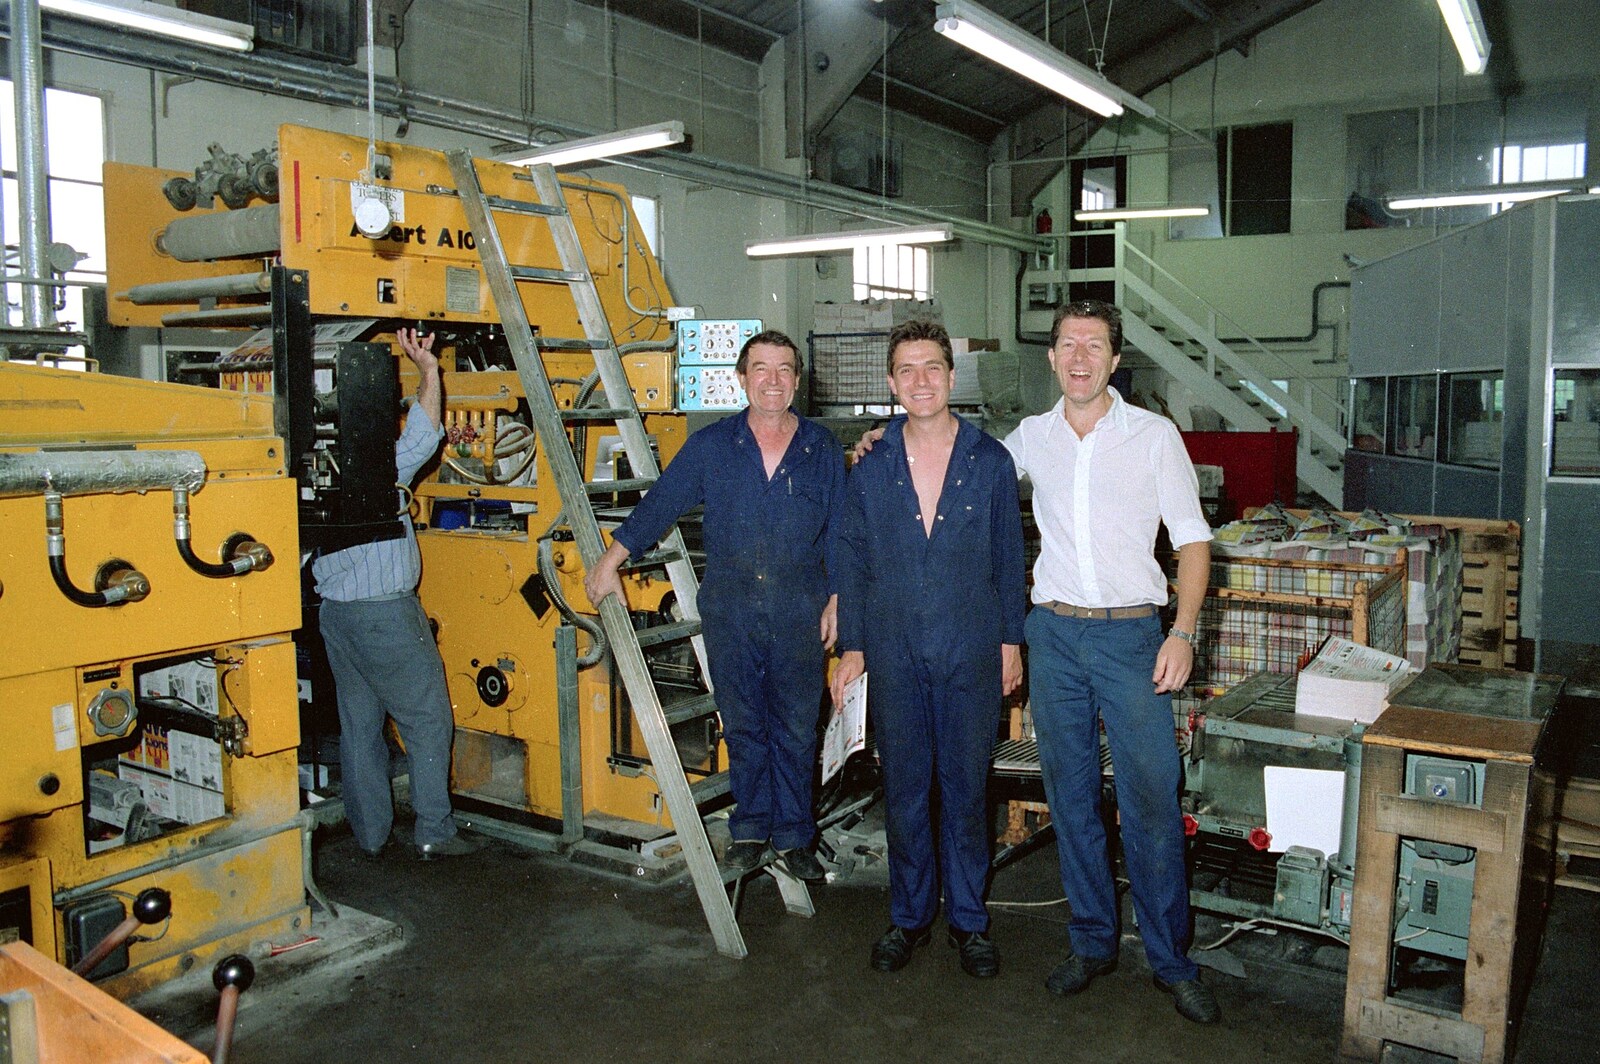 The boys in the factory on an Albert A101 press from Nosher Leaves Soman-Wherry Press, Norwich - 3rd August 1988